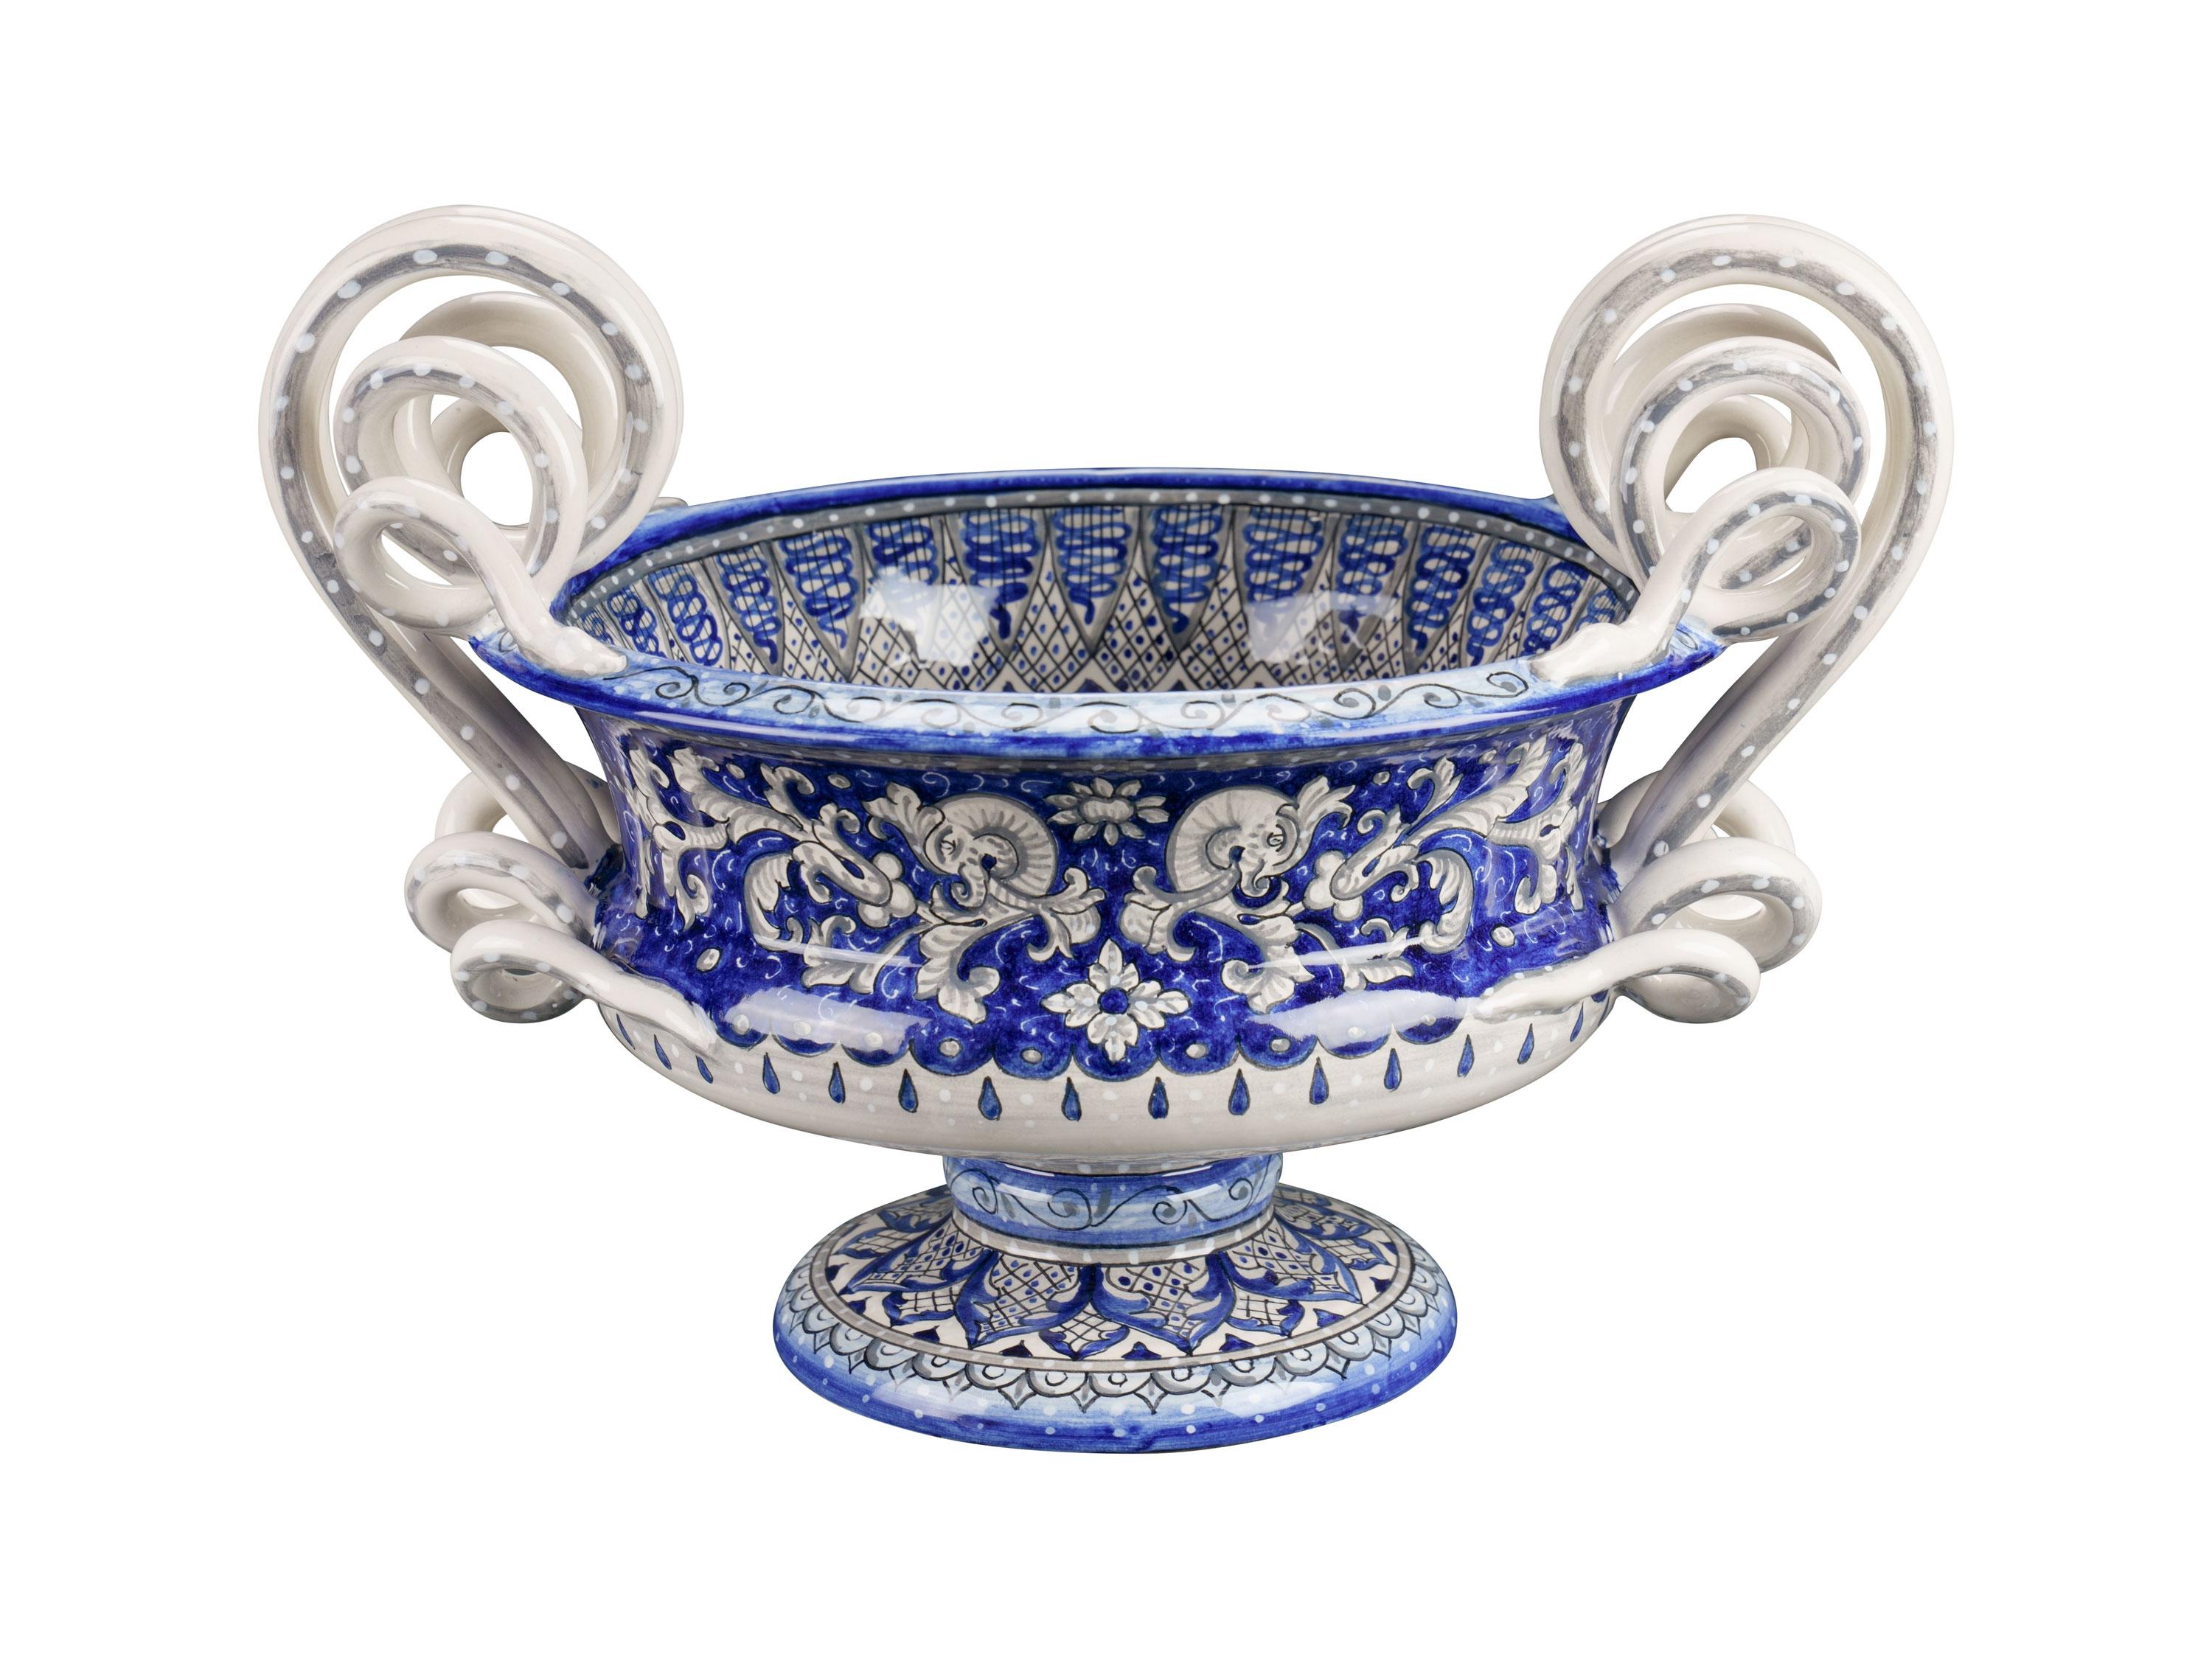 Italian Tableware Set Ceramic, Serving Centerpiece Bowl, Charger Plates, Blue Majolica  For Sale